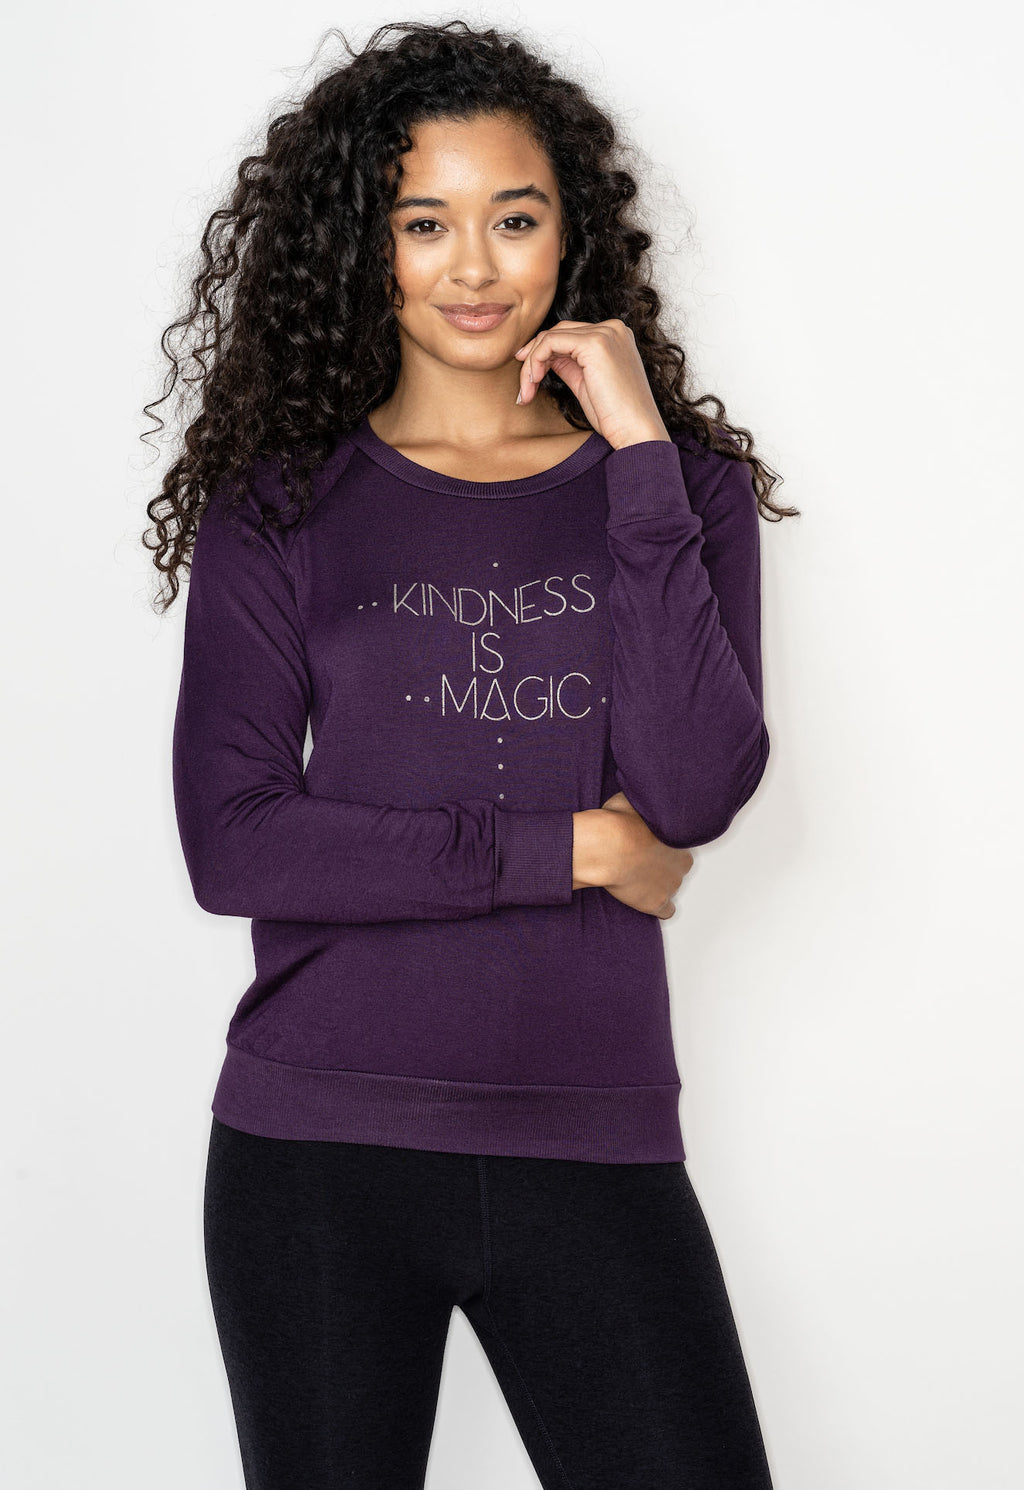 Kindness Is Magic' Print Full Sleeves Tee for Women